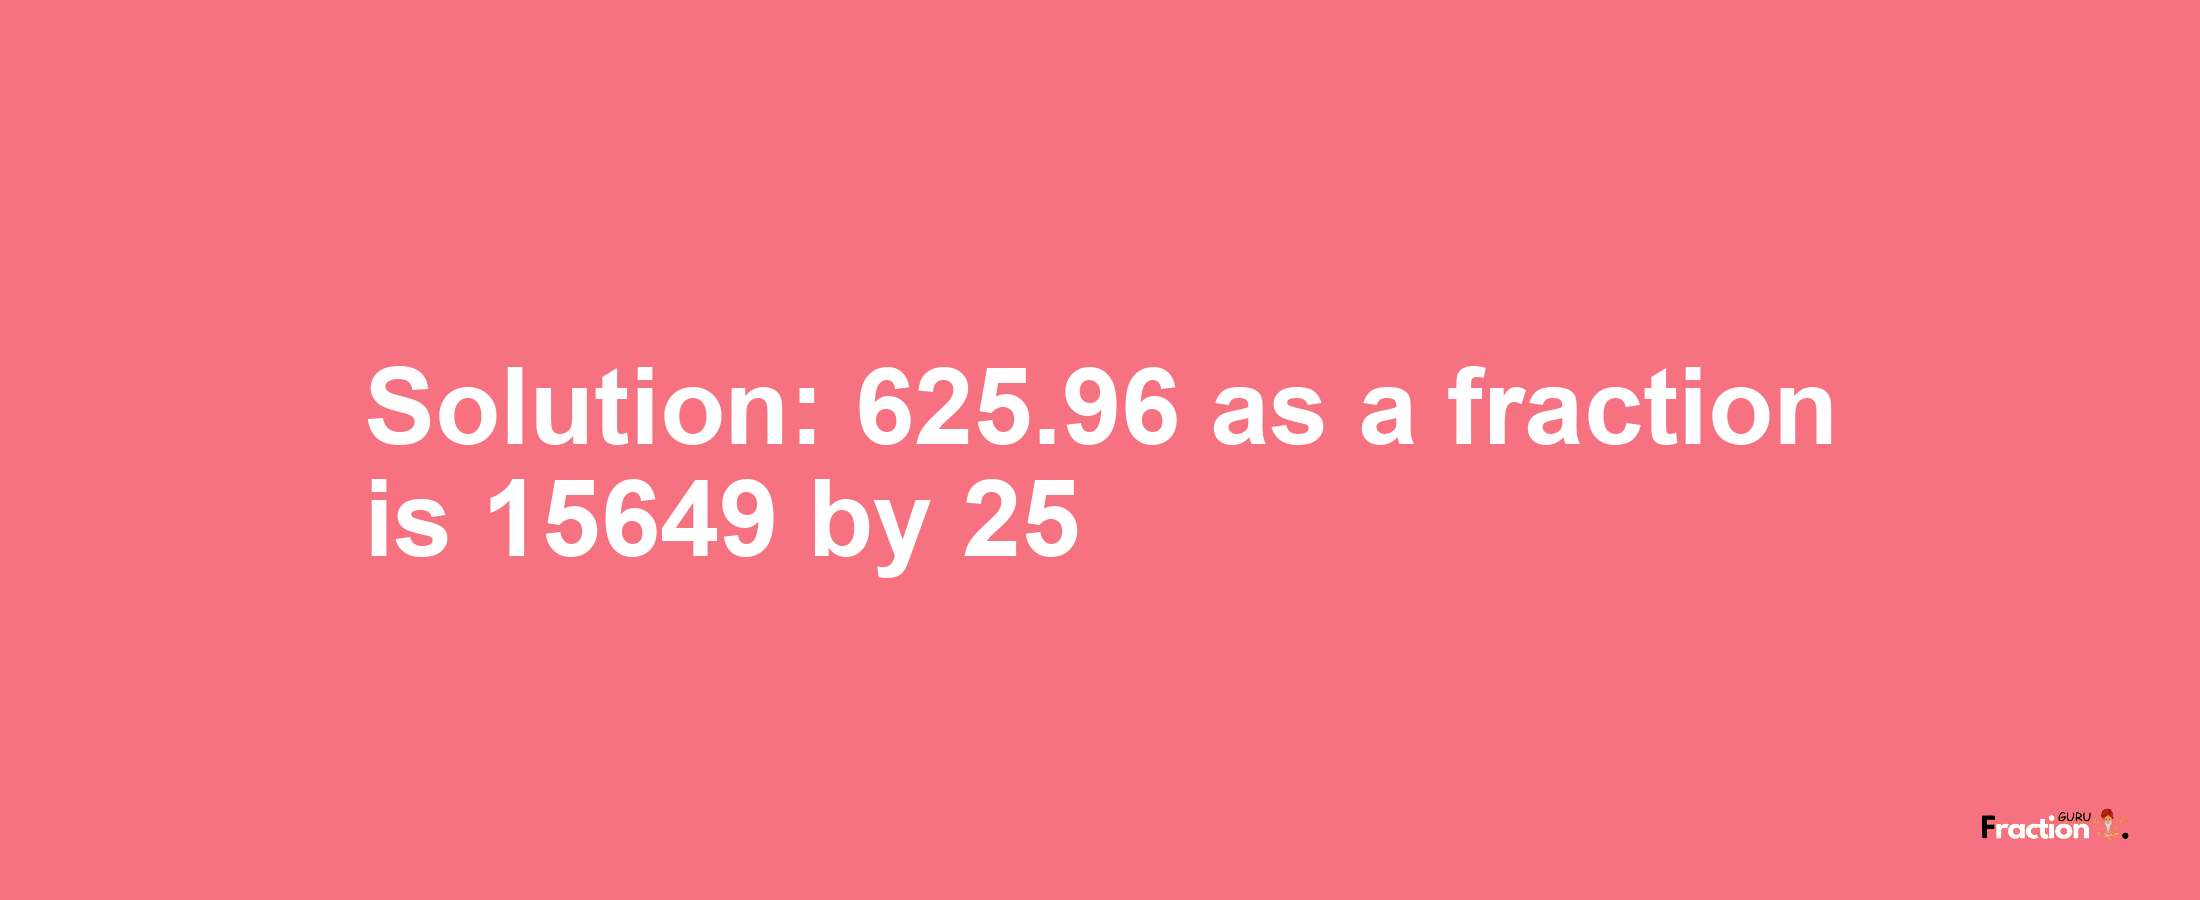 Solution:625.96 as a fraction is 15649/25